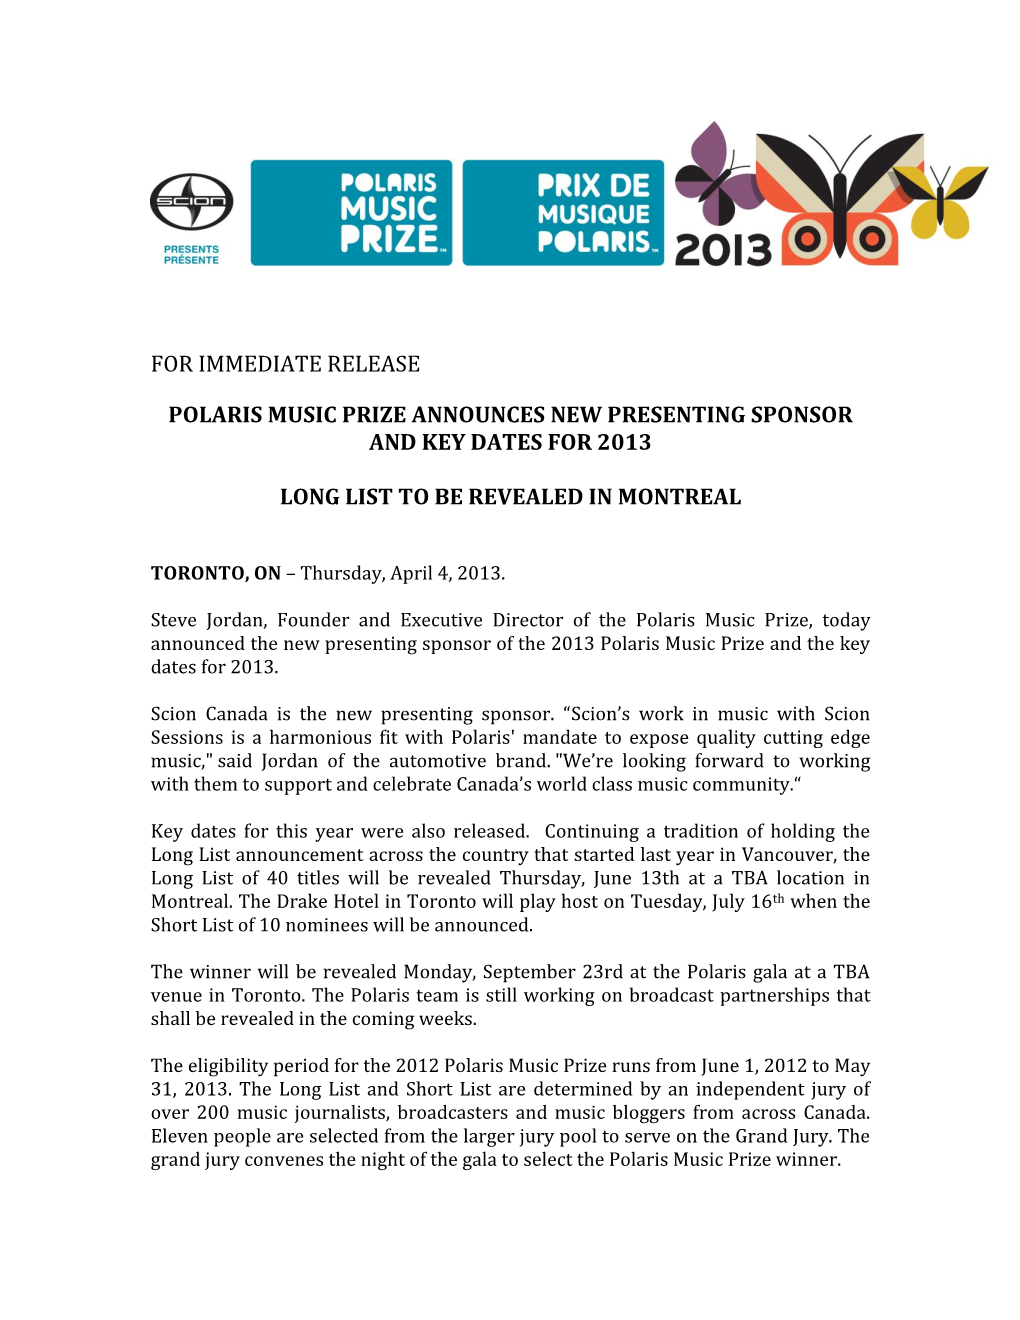 Polaris Music Prize Announces New Sponsor and Key Dates for 2013